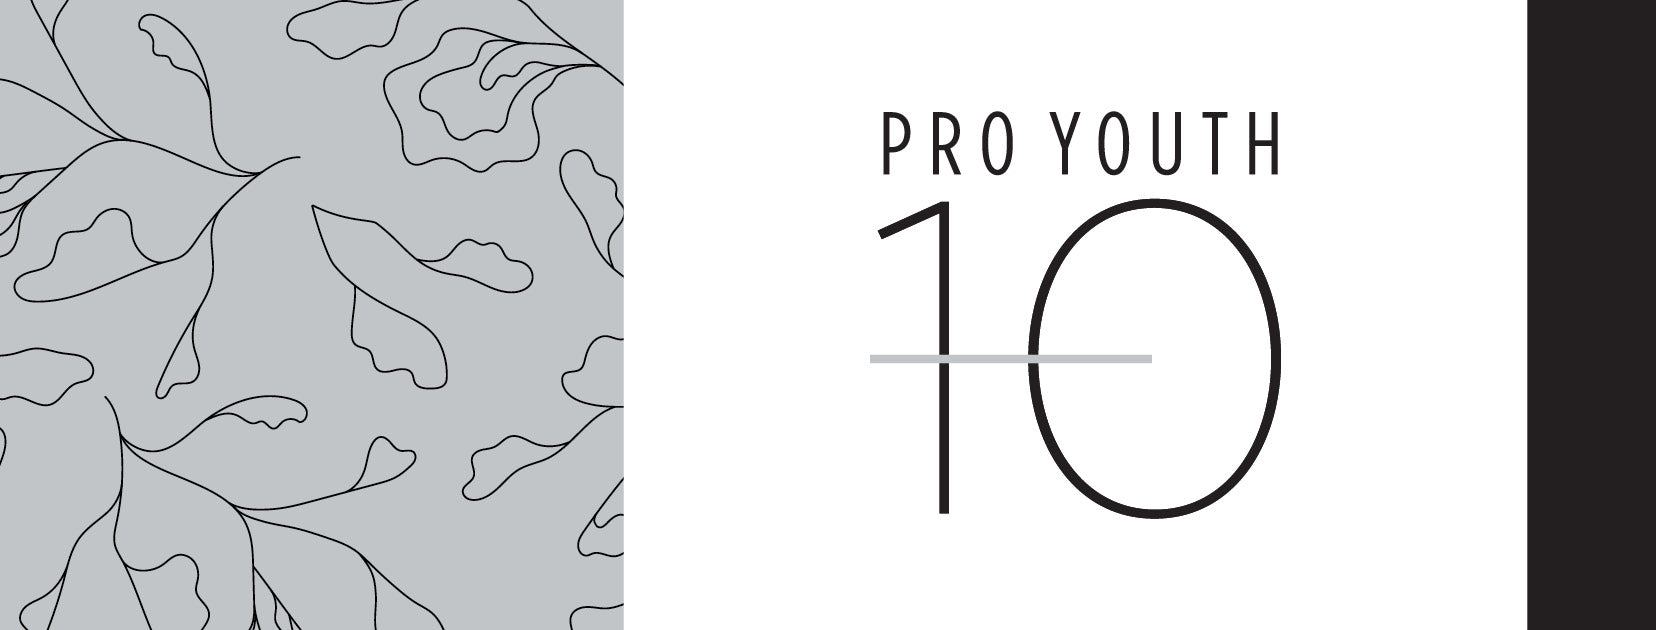 Pro Youth -10 Building & Strengthening